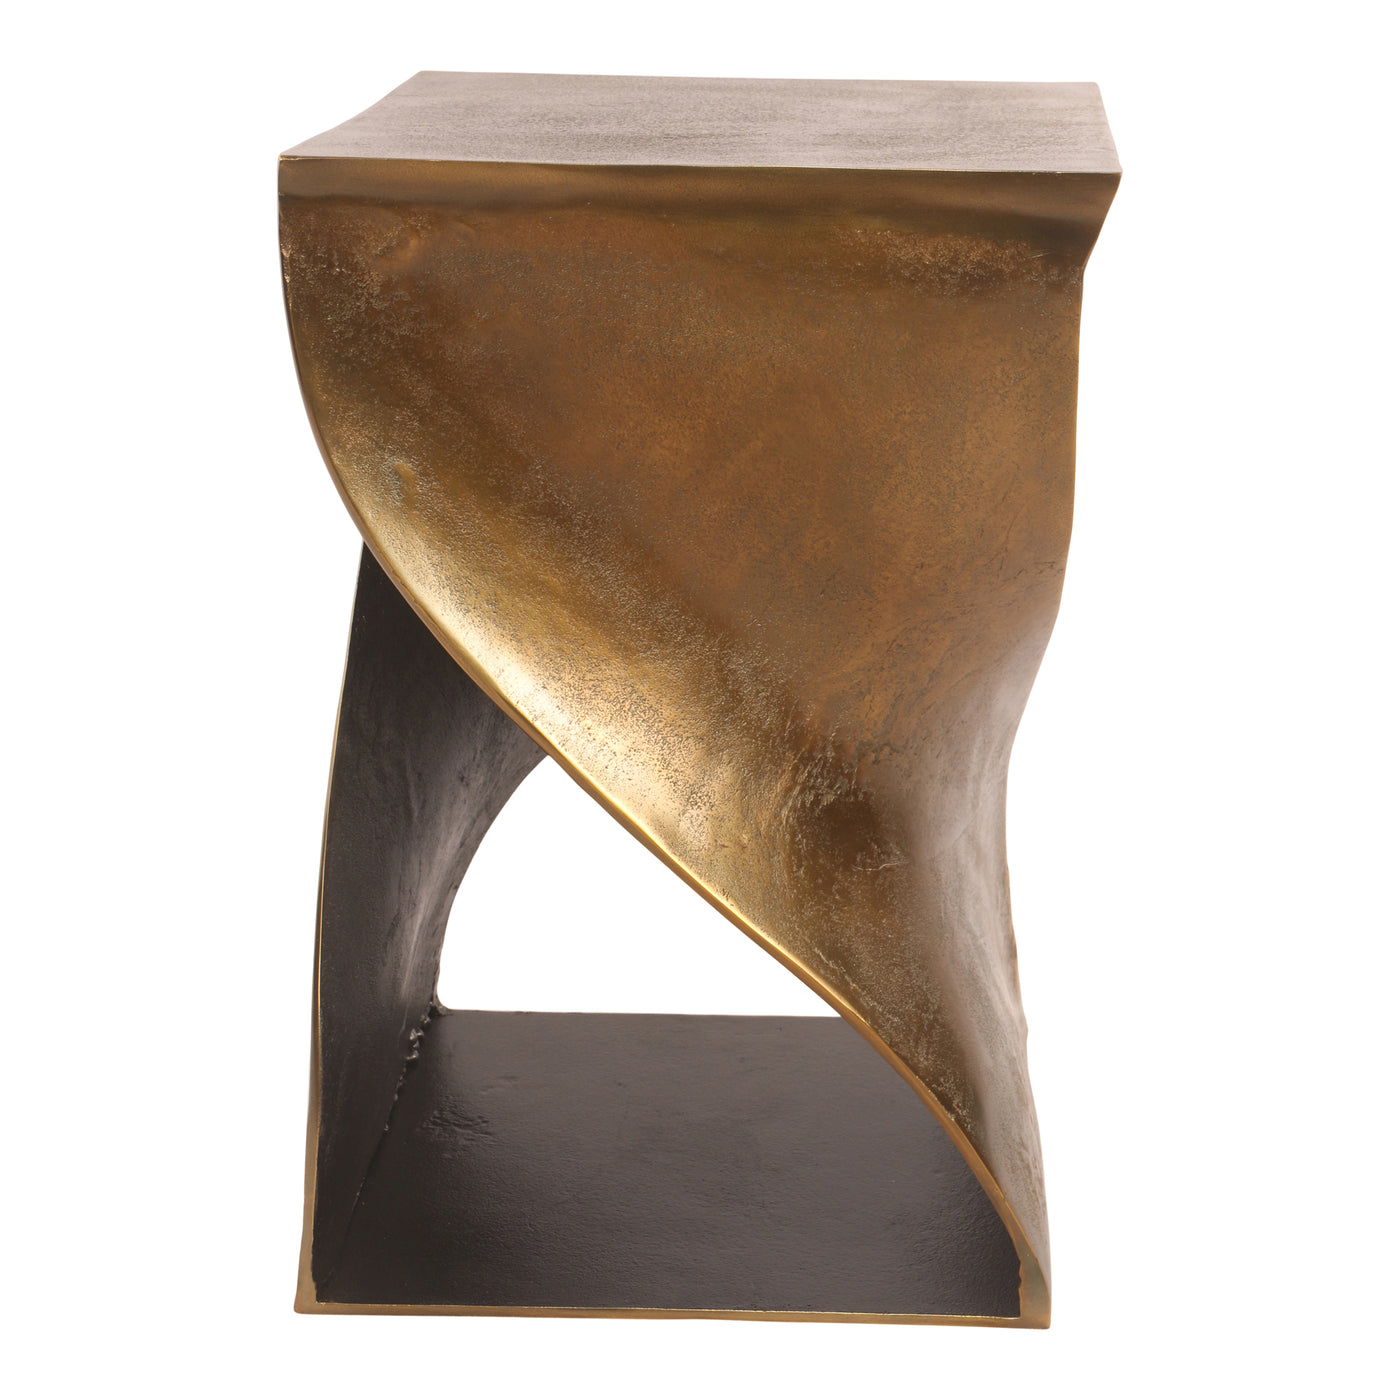 This twisted, two-tone accent table is cast in aluminum with a black, antique brass finish. Ideal as a stylish accent tabl...